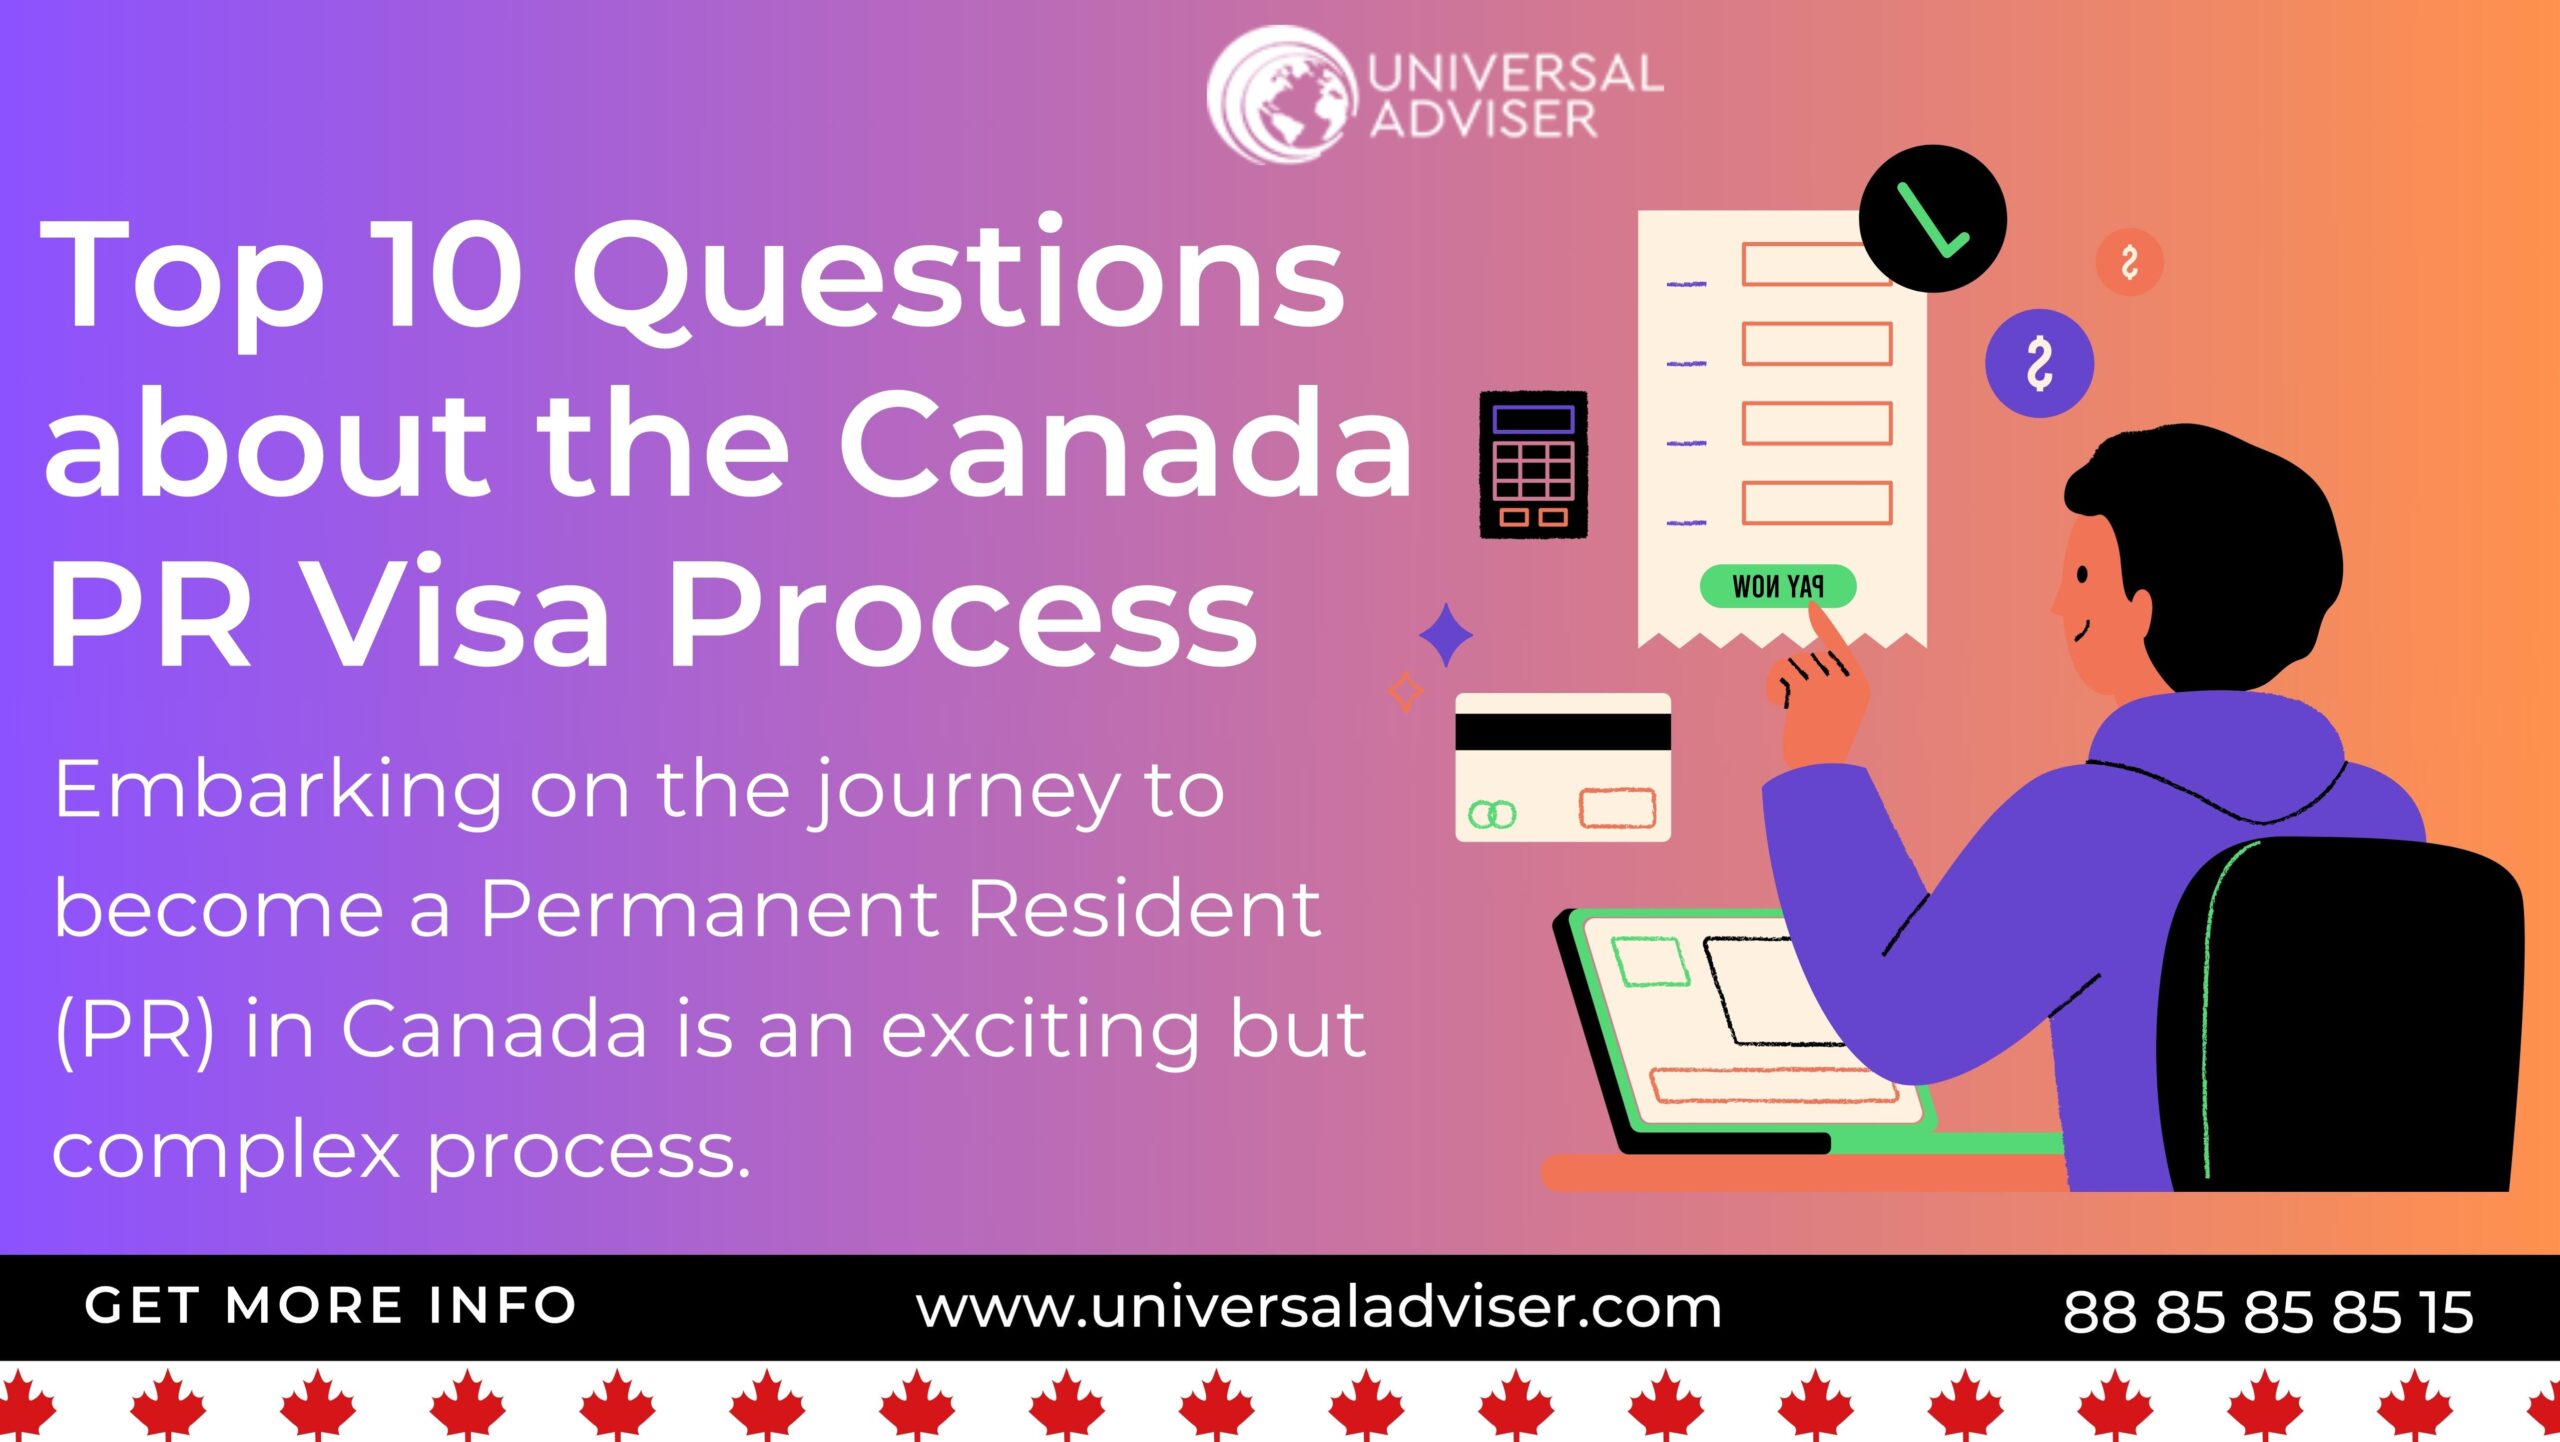 Top 10 Questions about the Canada PR Visa Process